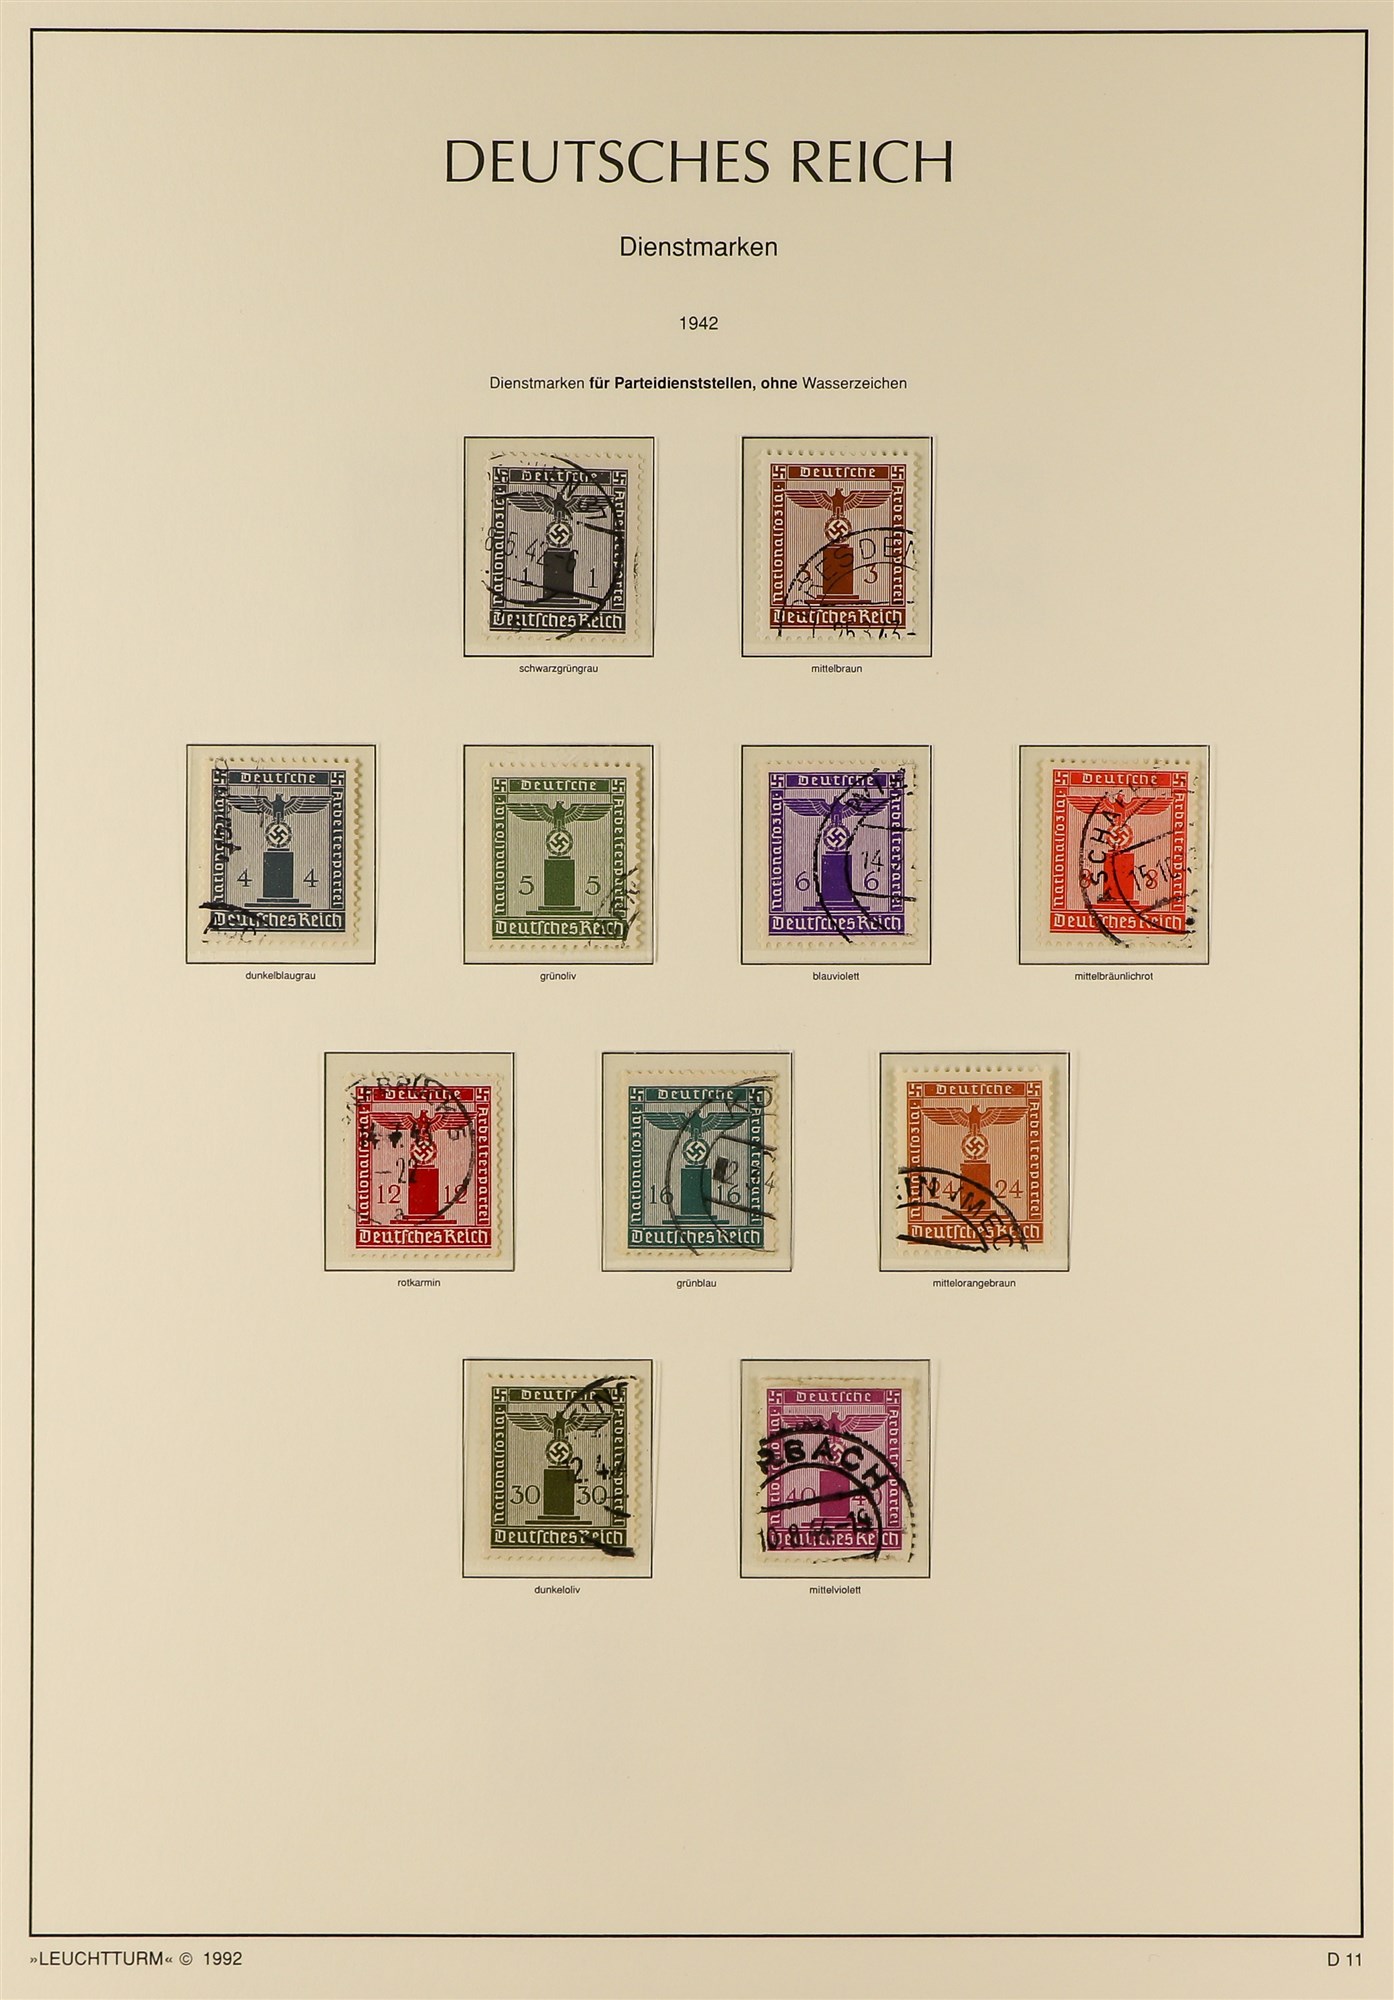 GERMANY OFFICIAL STAMPS 1903 - 1944 COLLECTION of used stamps, near- complete for the period, s.t. - Image 4 of 5